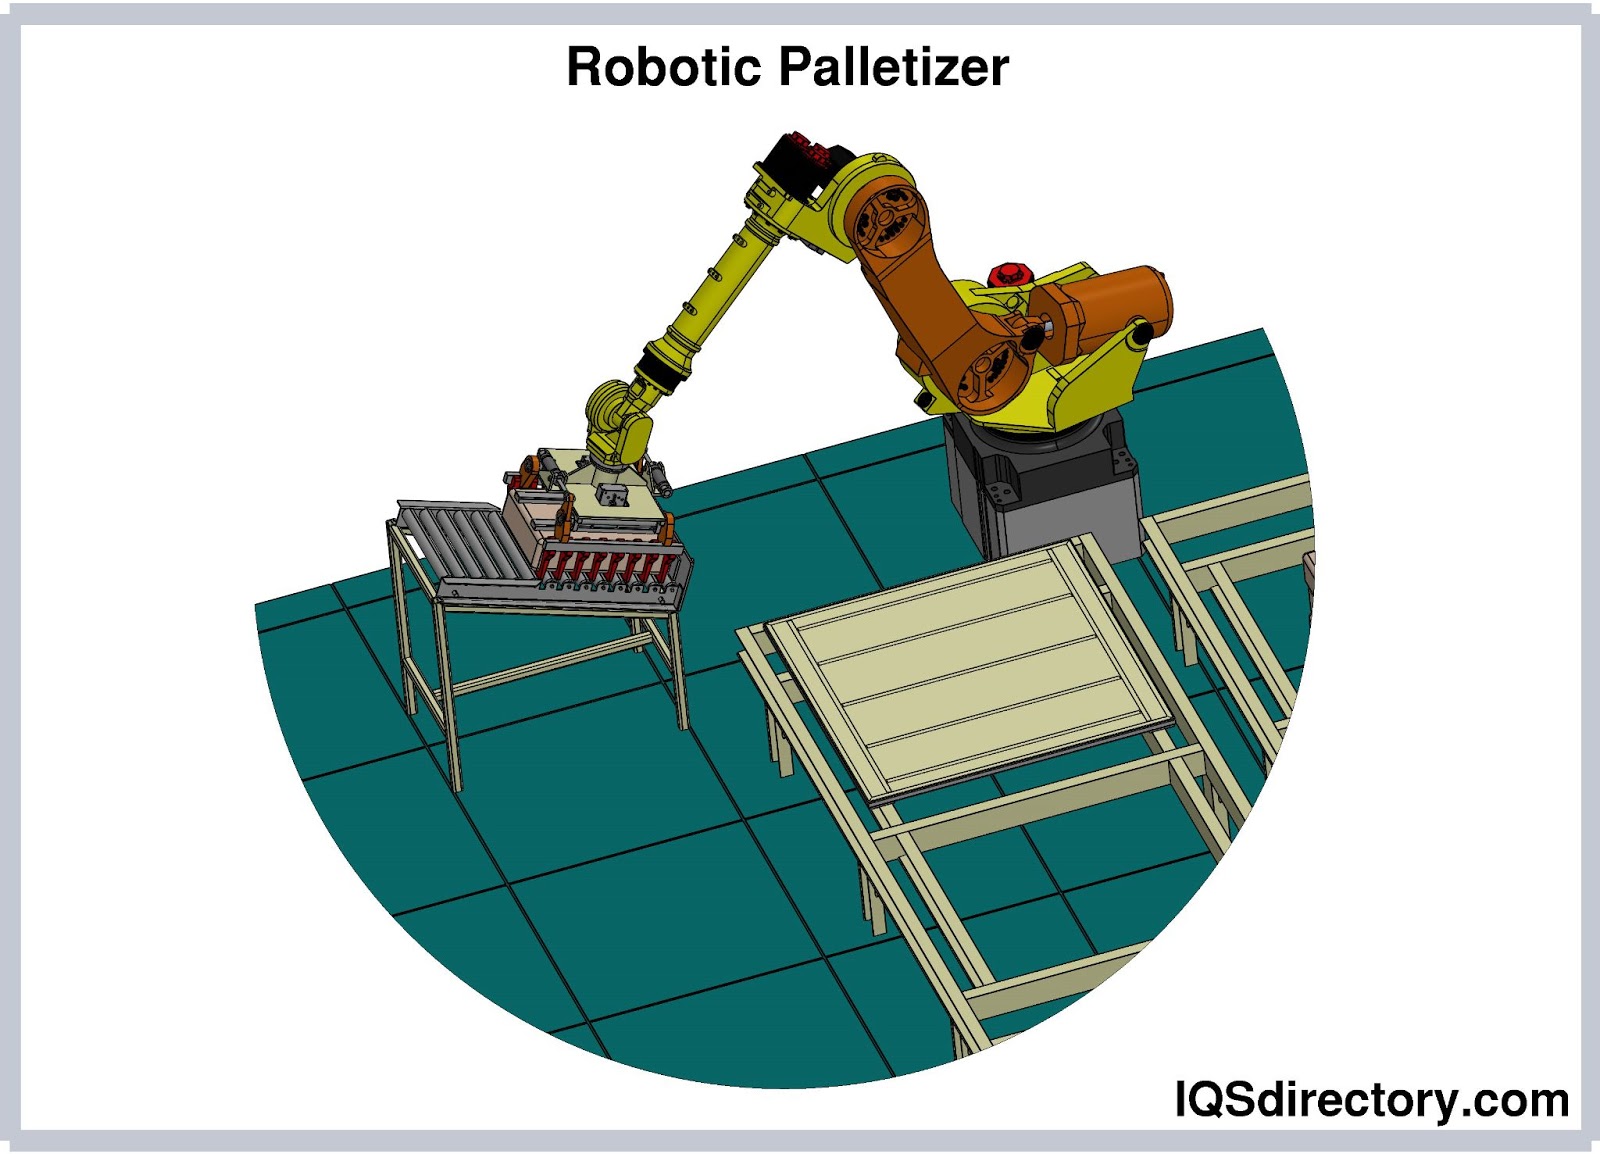 Robotic Palletizer: What Is It? How Does It Work? Types Of